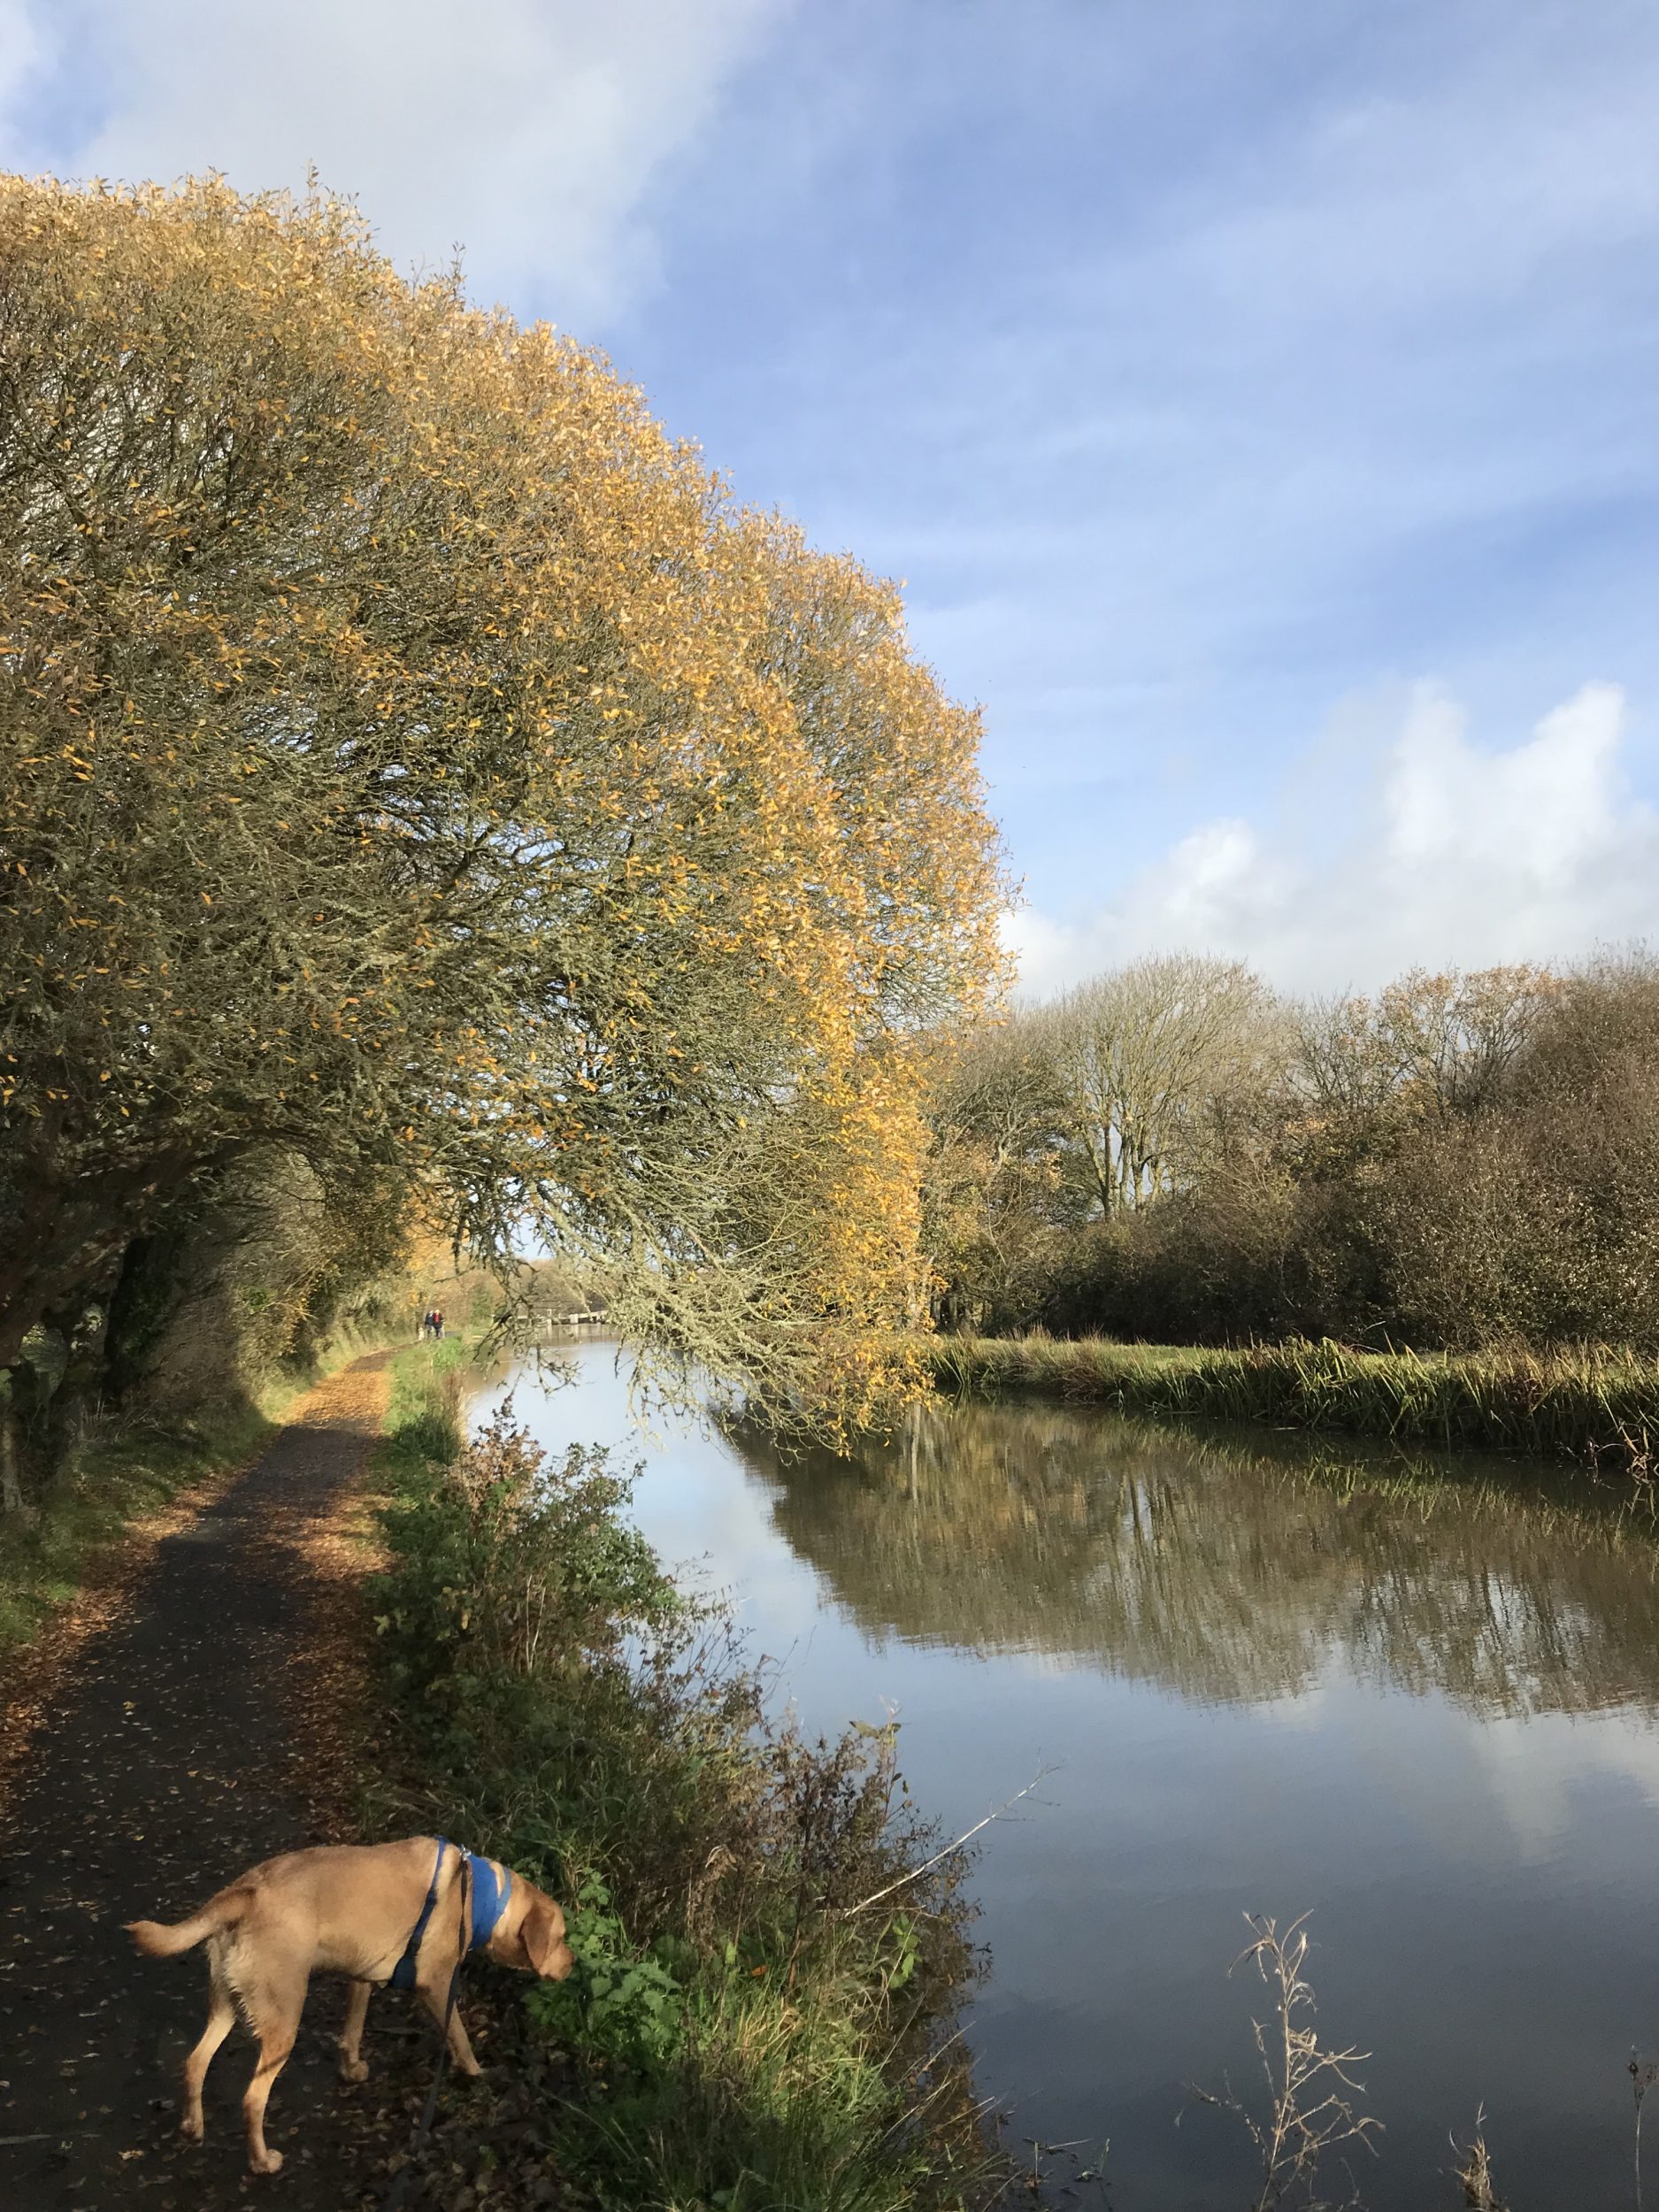 Bude canal - a photo showing Bude canal in the Autumn